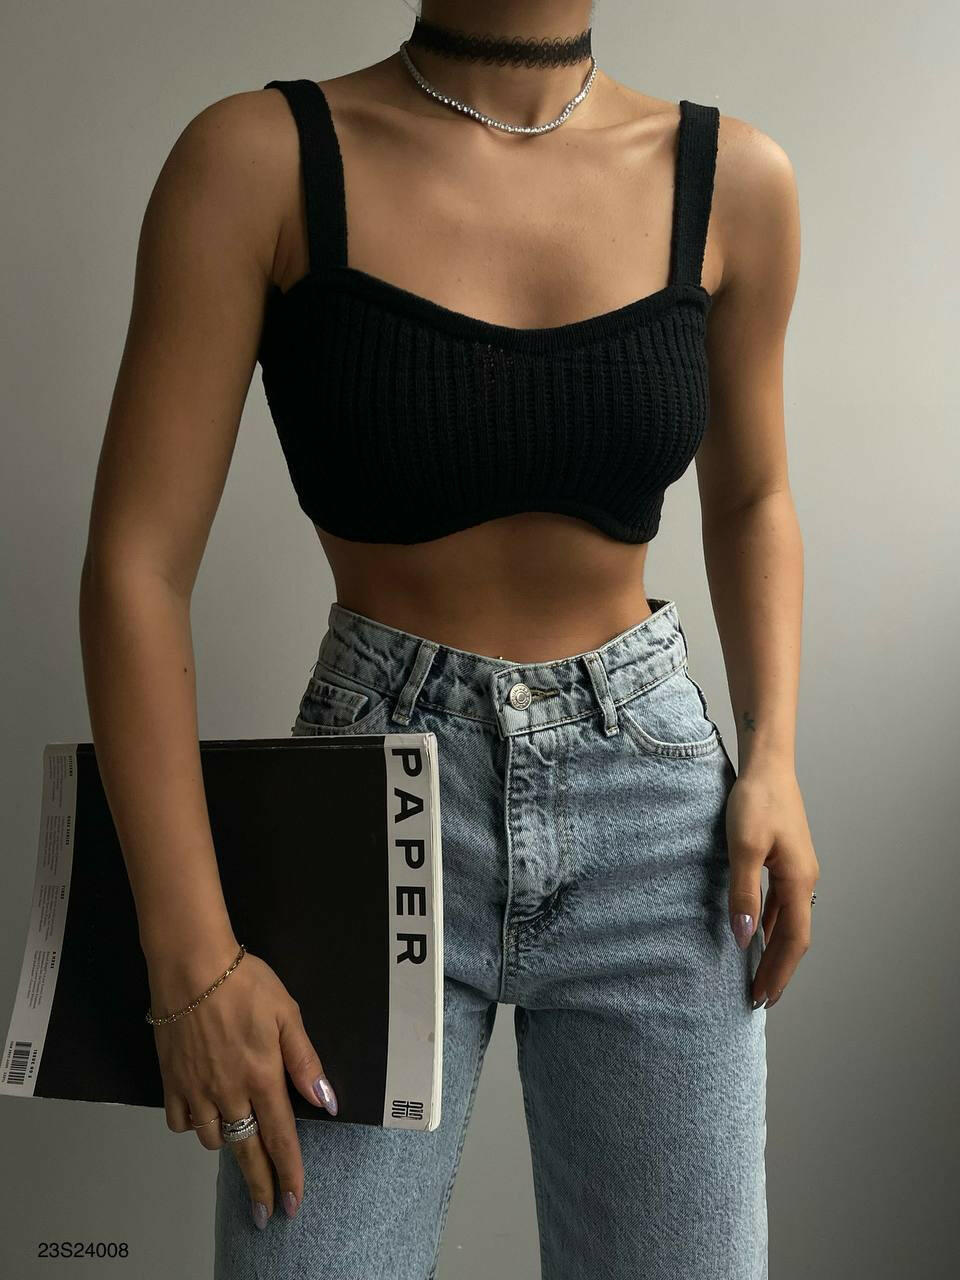 Thick Strap Knit Top Pattern Summer Cropped Top Bra BF23S24008 Black